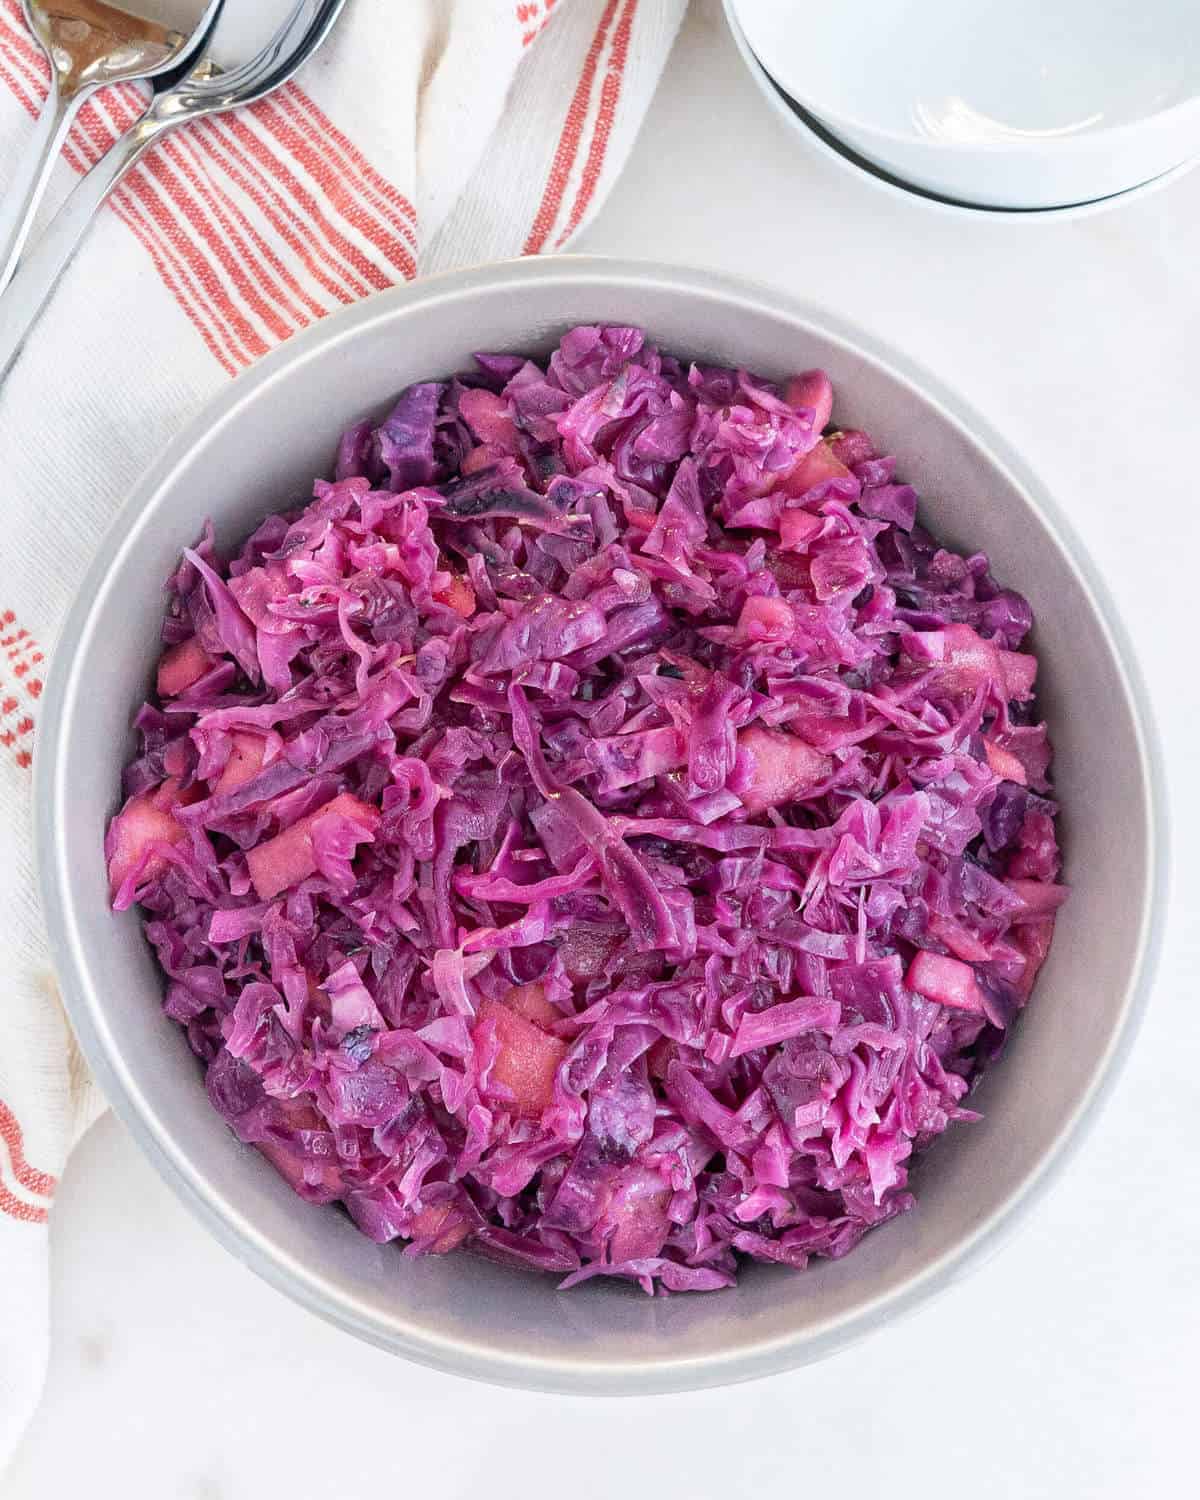 Large white serving bowl filled with sweet and sour red cabbage.